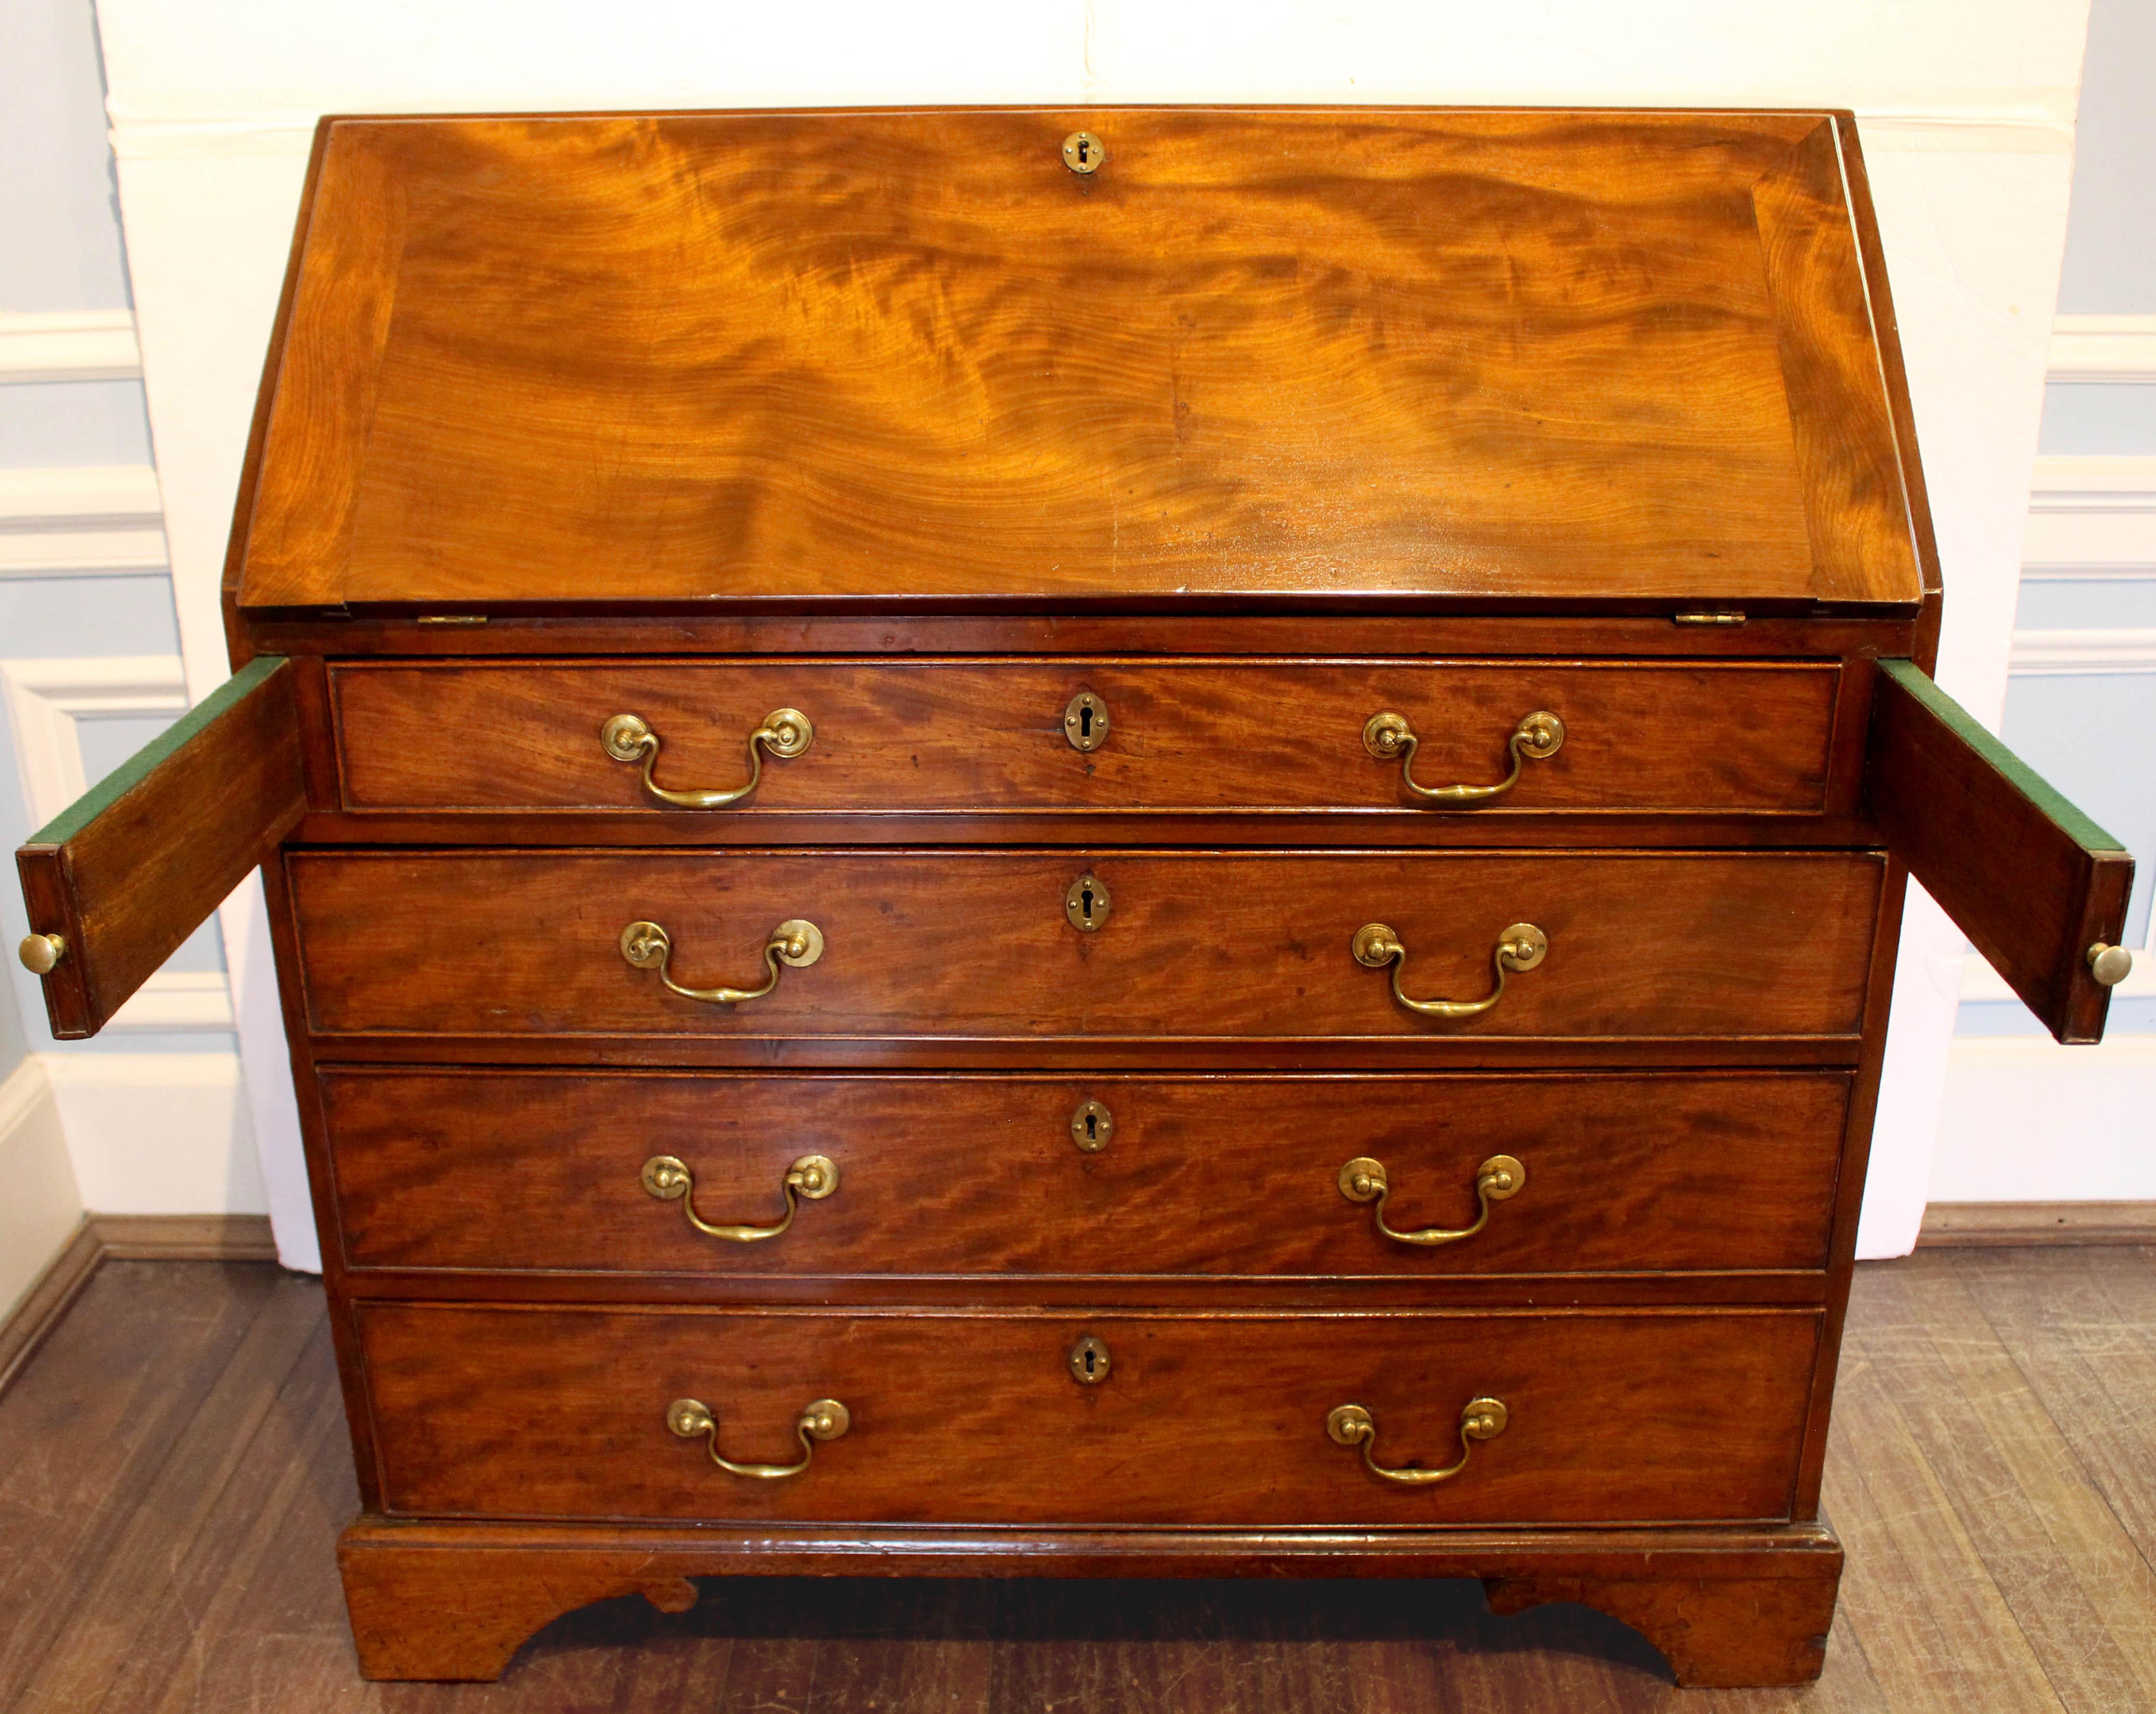 Circa 1760-80 George III period slant front bureau, English. Deep rich Cuban mahogany timbers. The interior is well fitted with 4 valanced pigeon holes above 2 long drawers, flanked by 2 ranks of three small drawers. Four long graduated drawers in